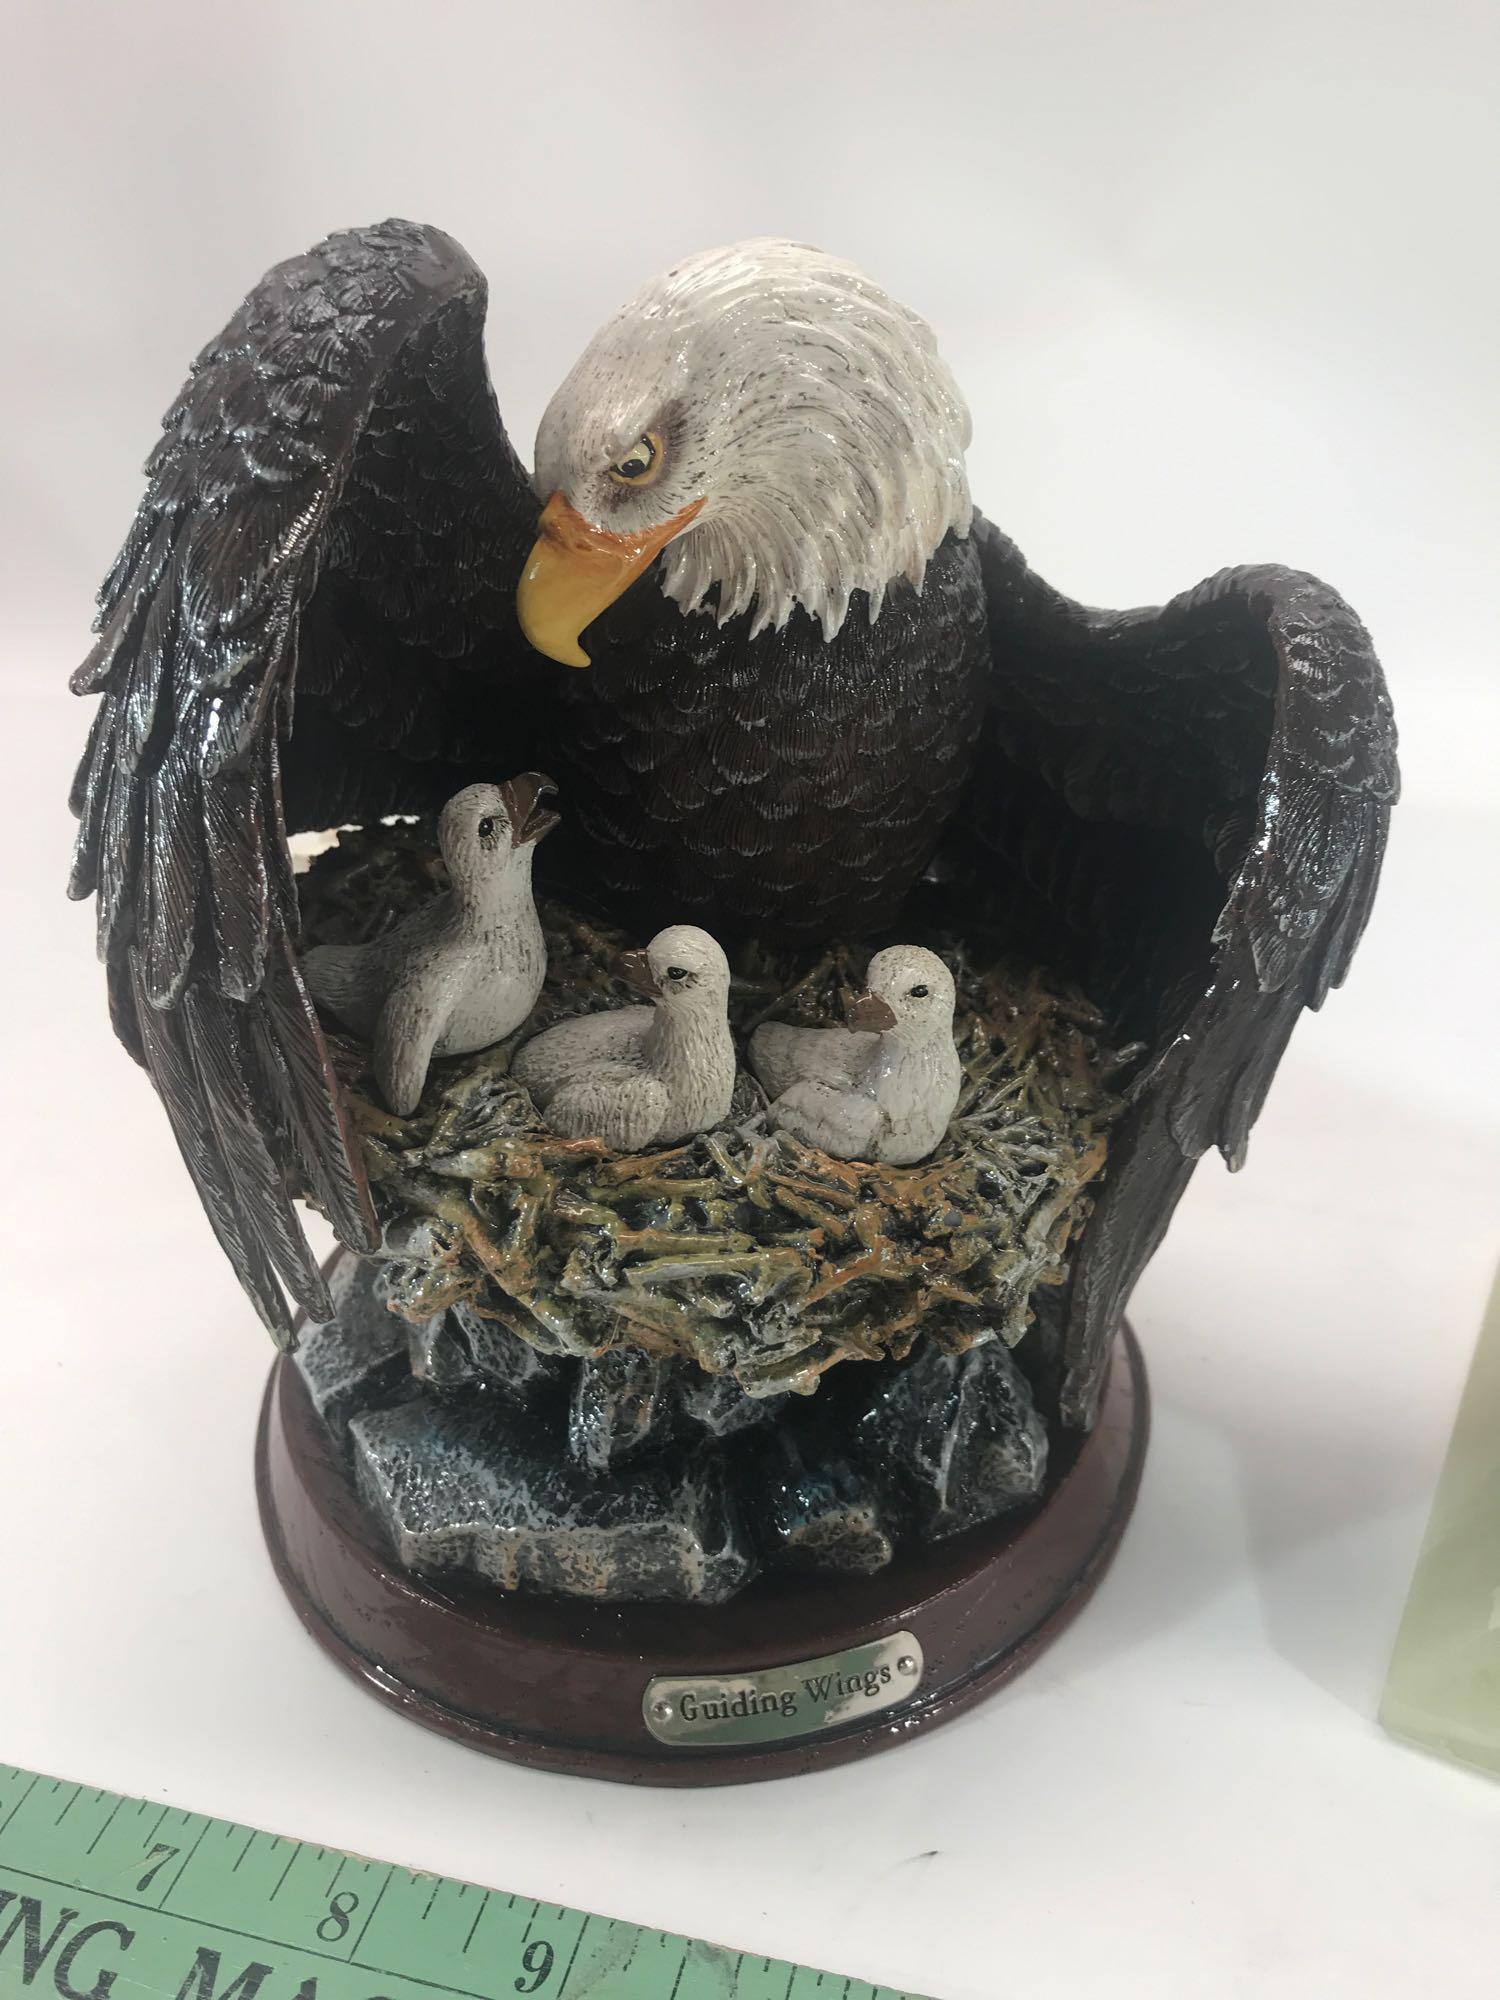 Guiding Wings Bald Eagle And Eagle Brass Statue 2 Units